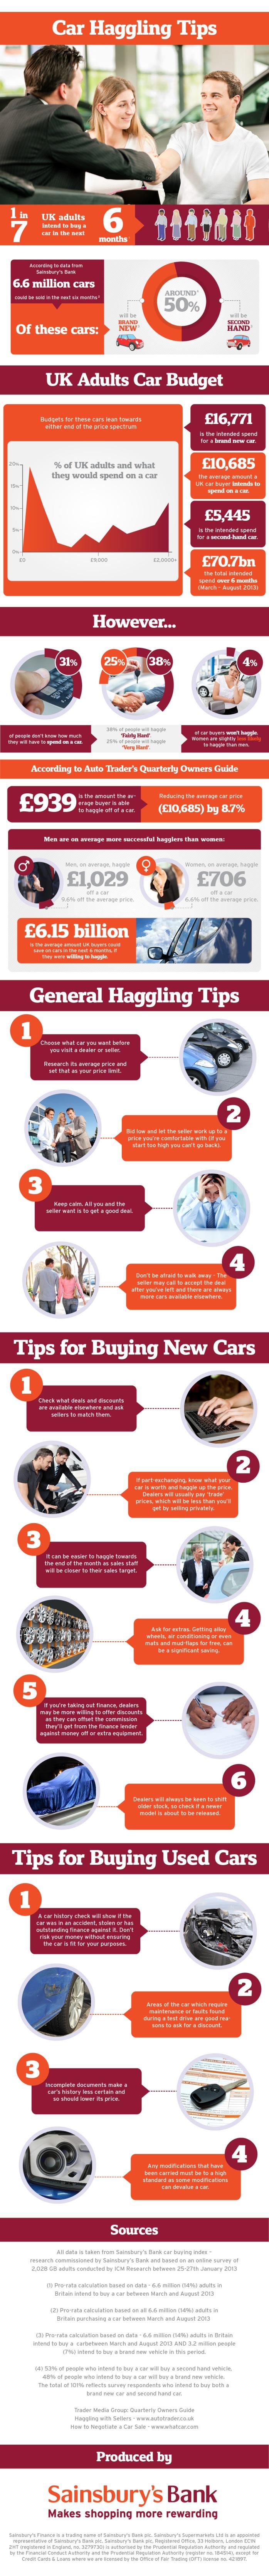 car haggling infographic